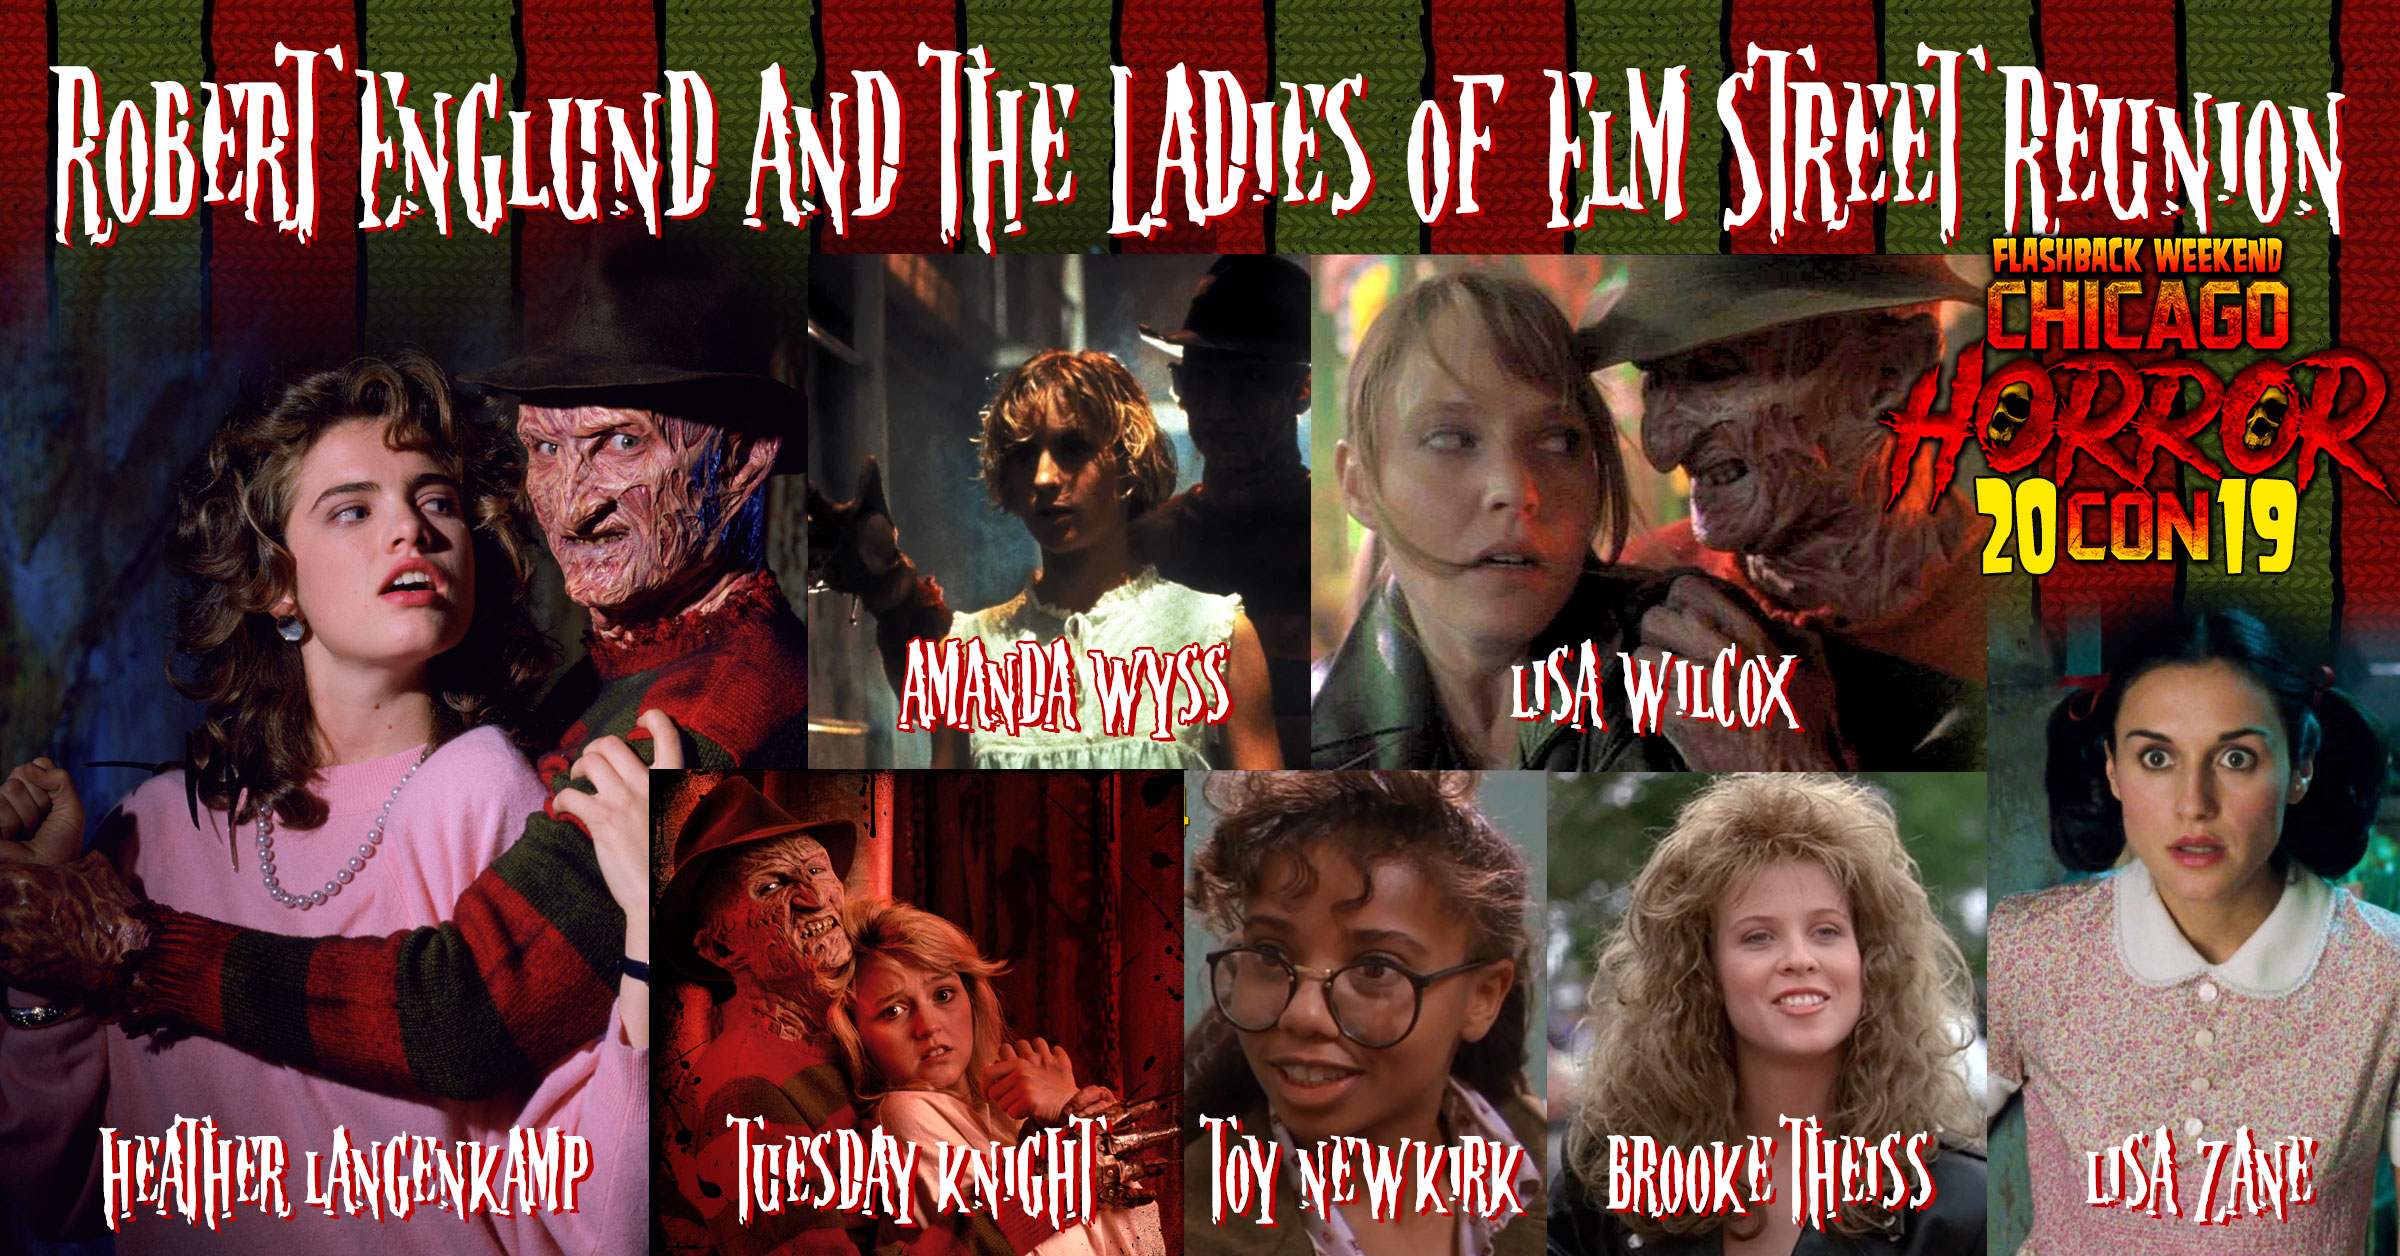 Robert Englund and the Ladies of Elm Street Reunion